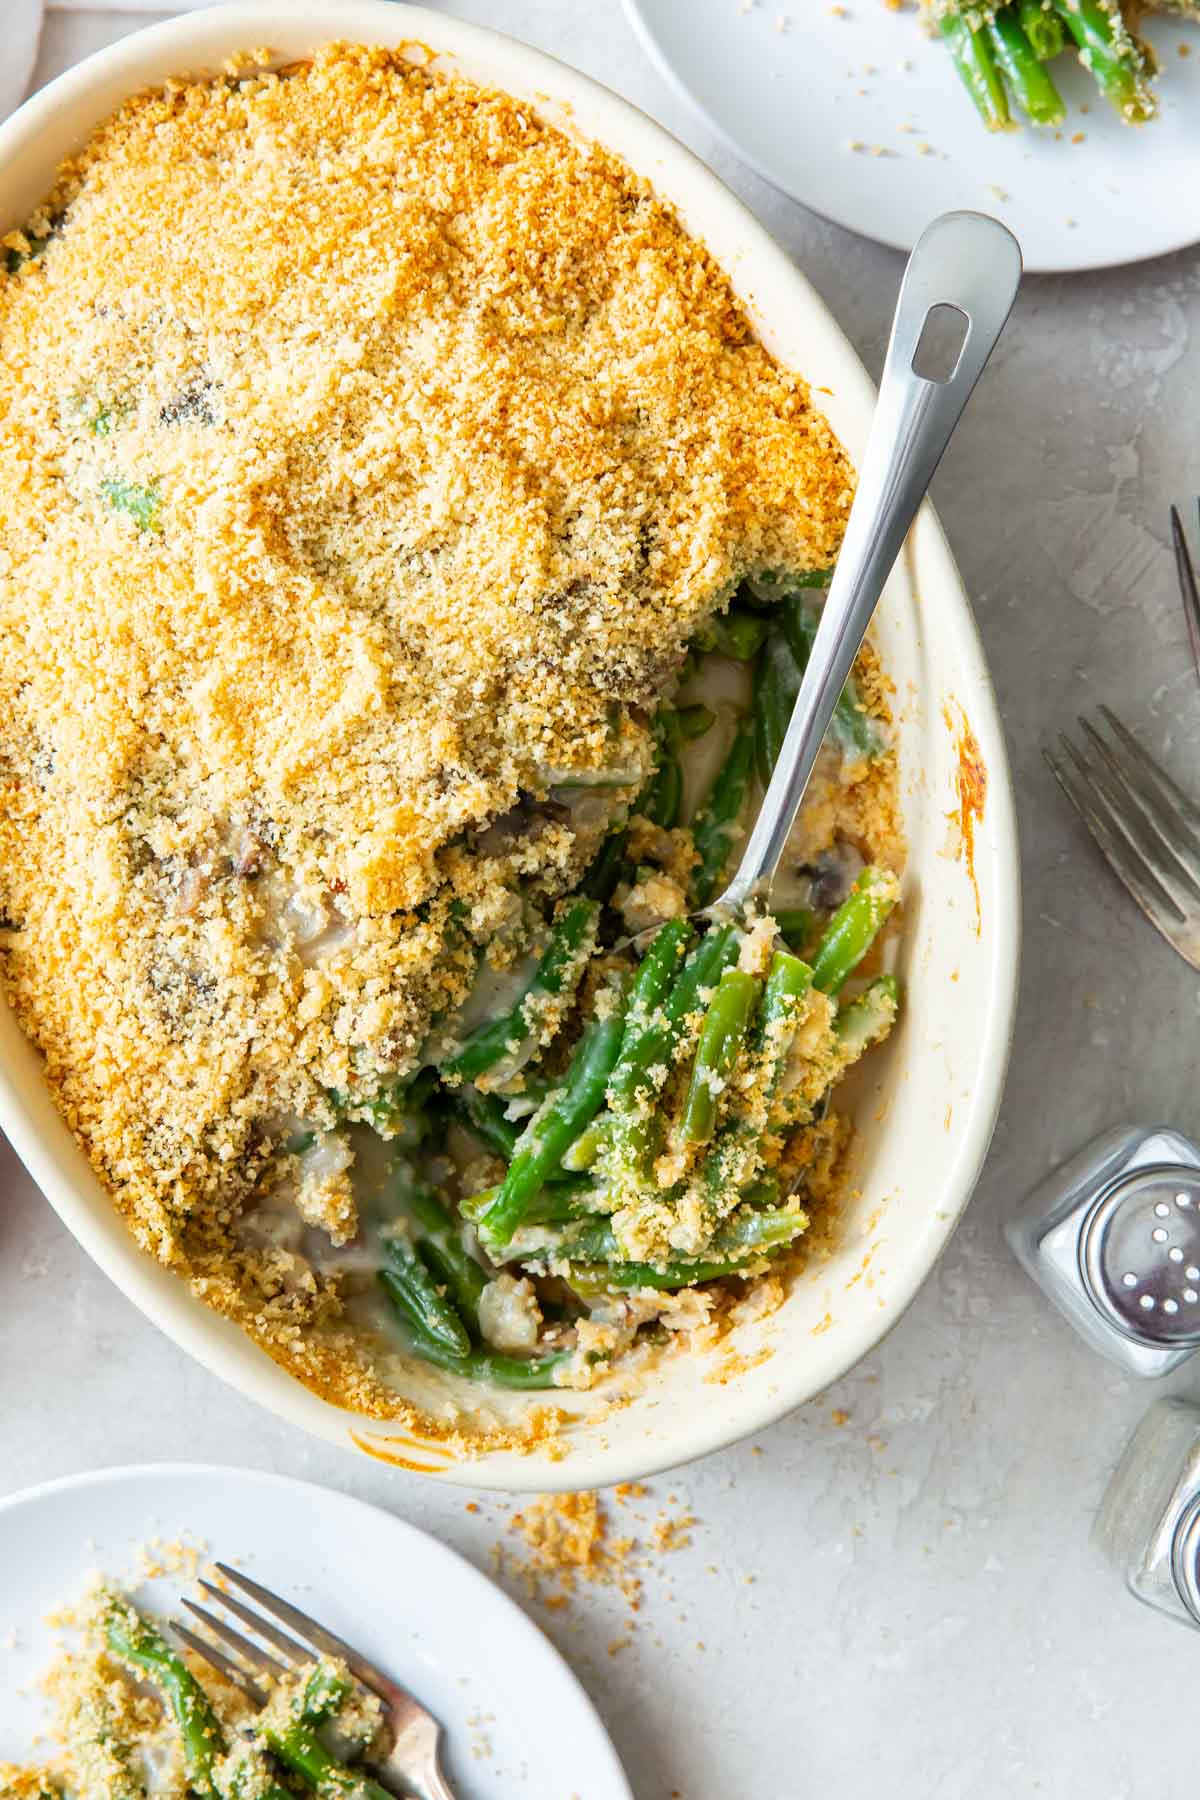 Green bean casserole in a baking dish with a serving spoon.